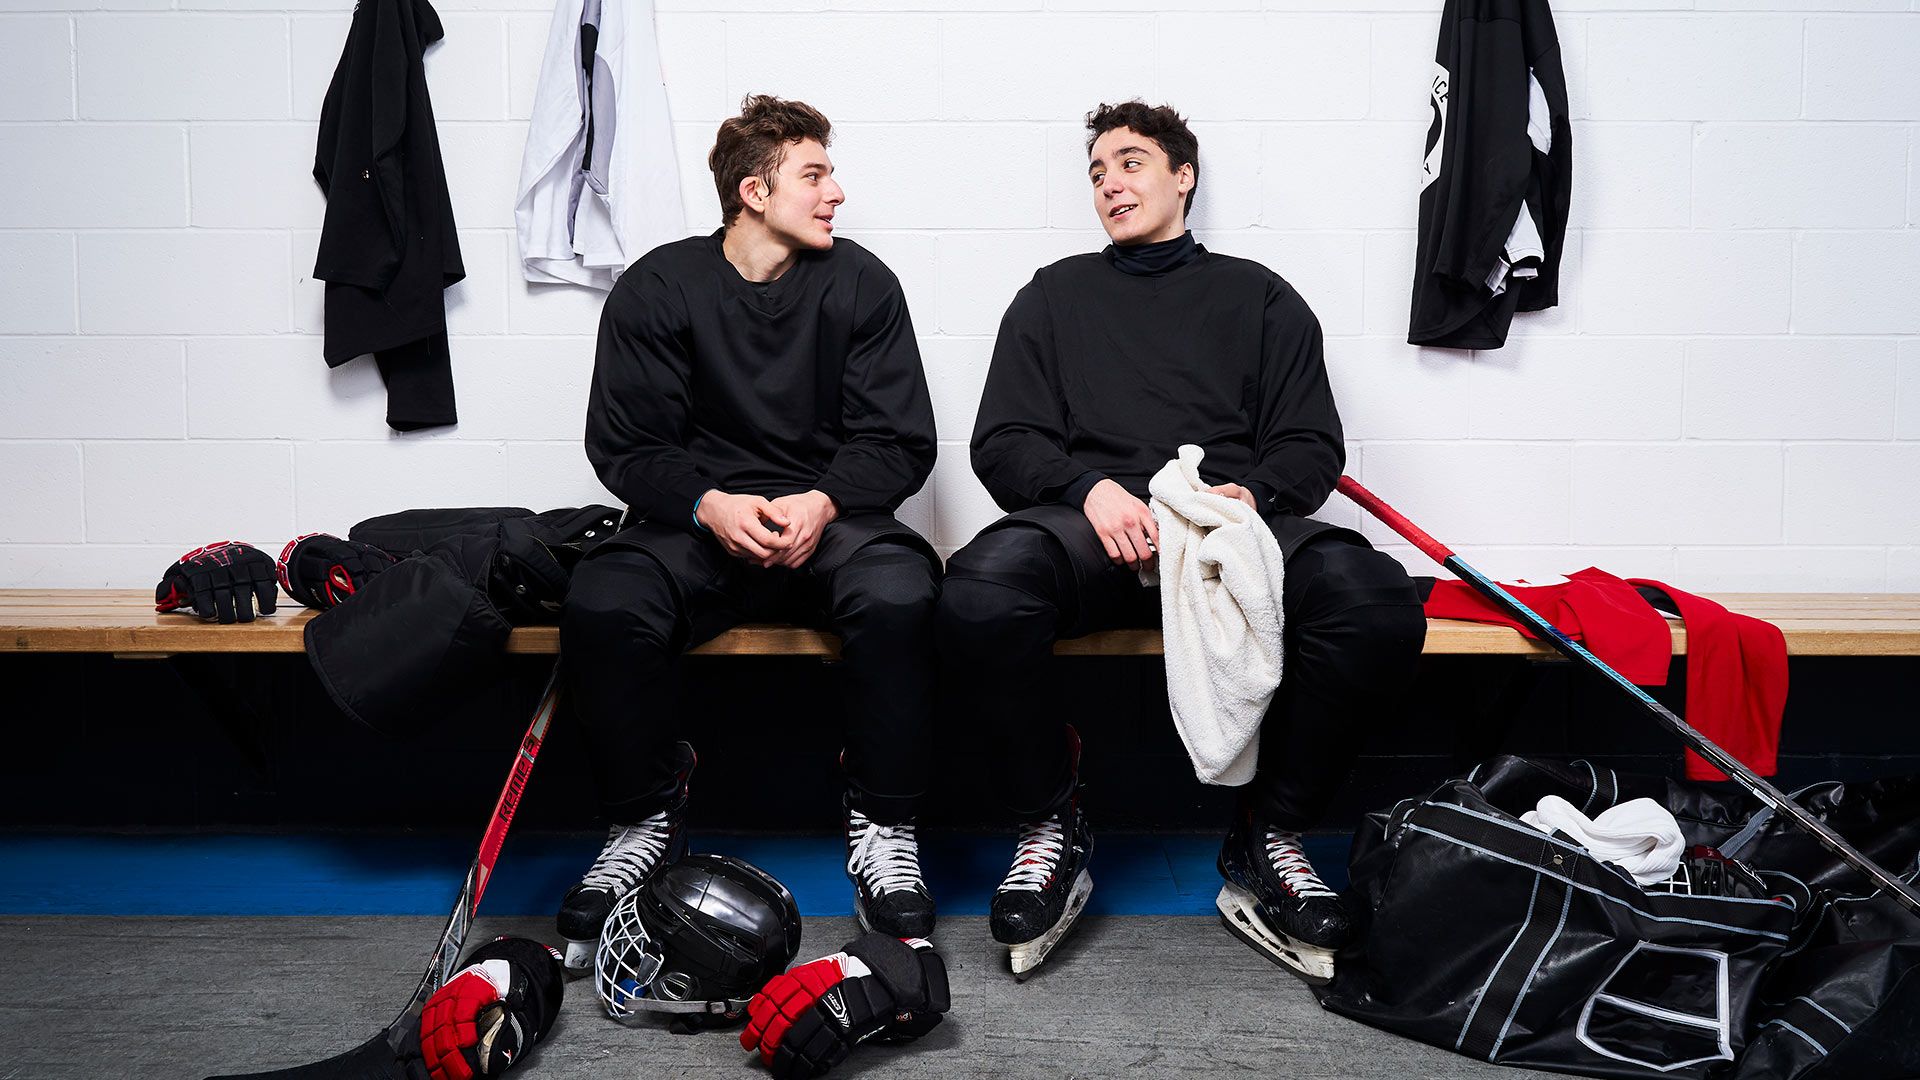 Two hockey players chatting in the changing rooms